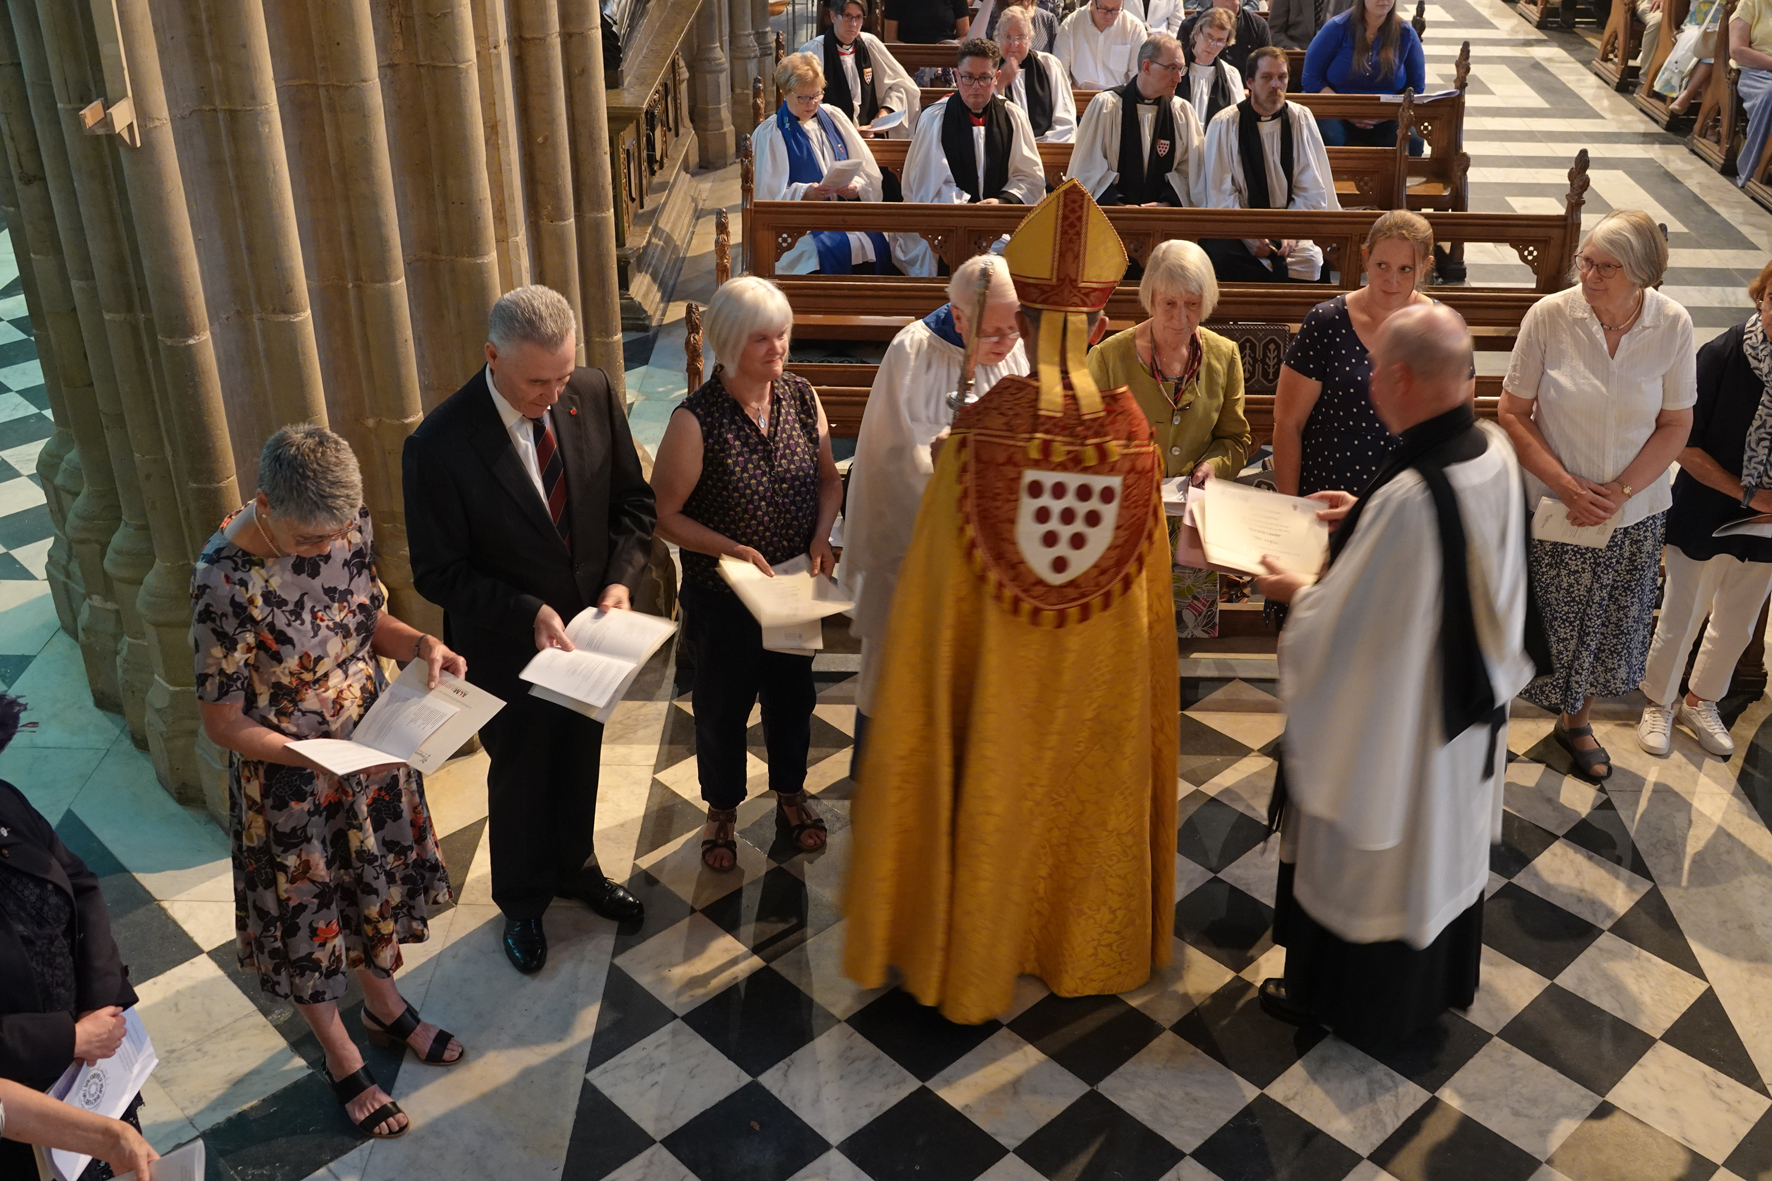 Bishop John presenting certificates to the ALMs in the Cathedral